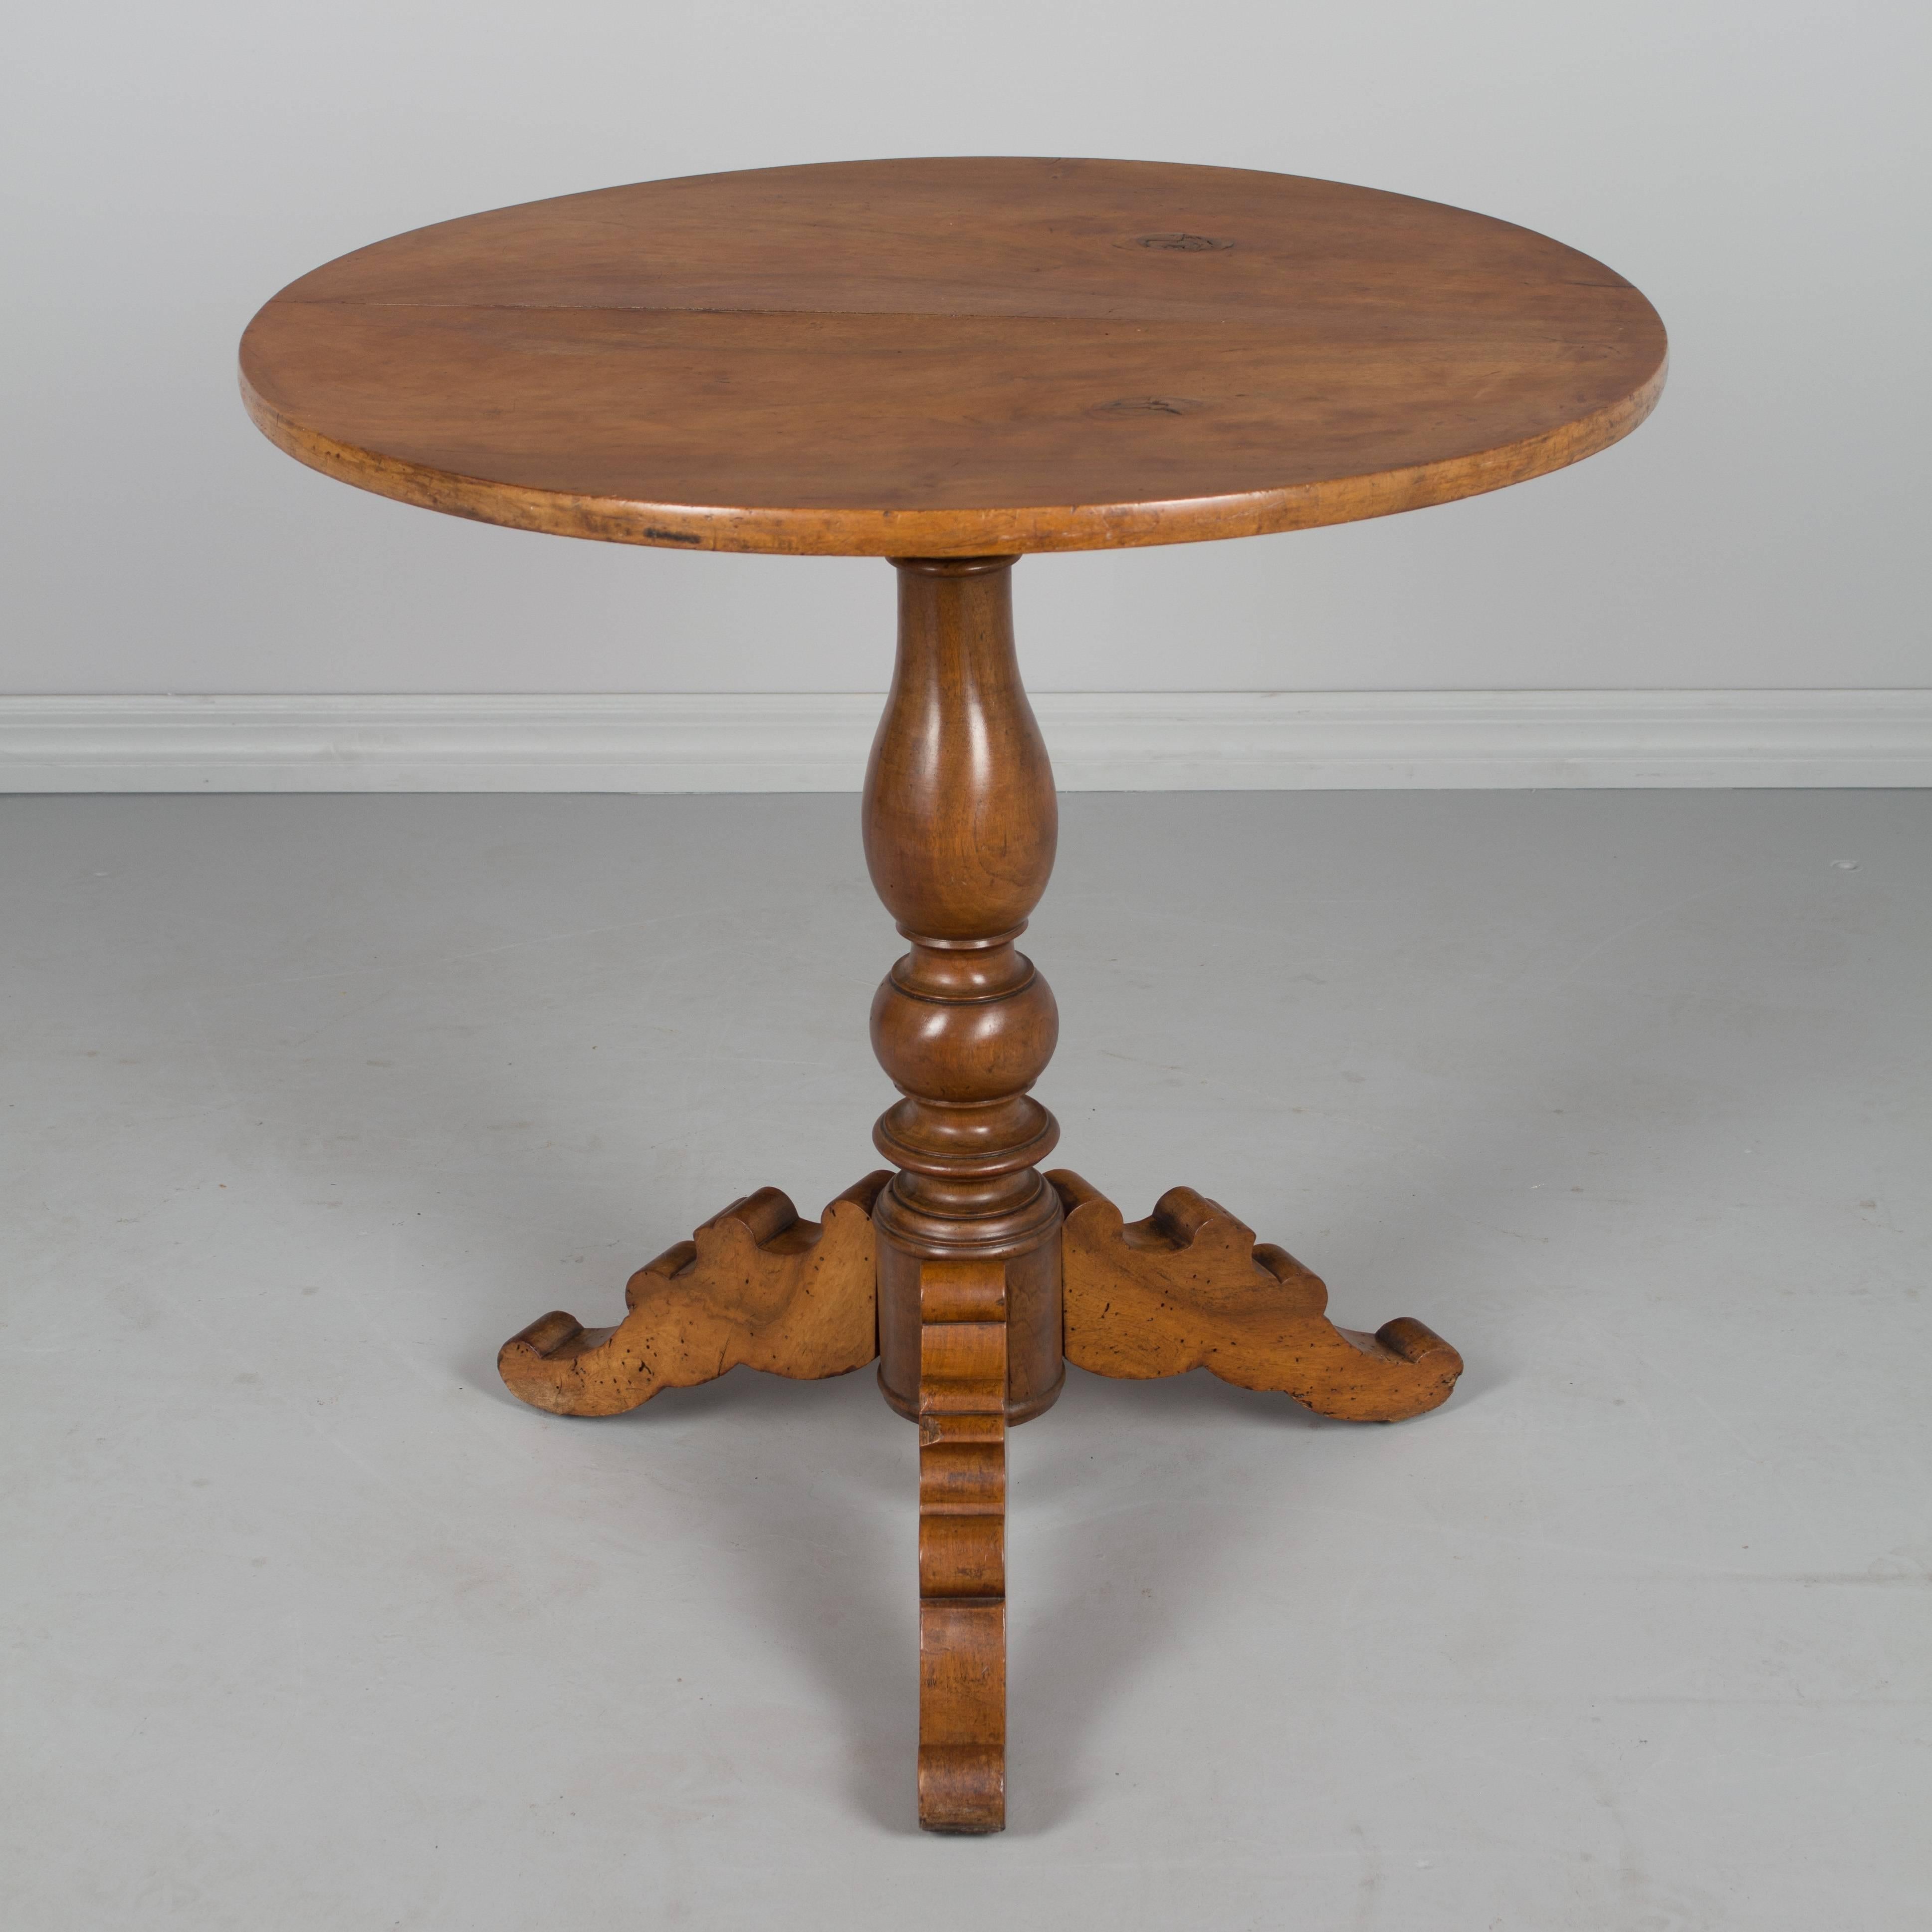 A 19th century French Louis Philippe gueridon, or circular side table, made of solid walnut. Turned pedestal base with shaped tripod legs. Tabletop is made of two bookmatched planks of walnut with prominent knots in the wood. In two pieces, the top